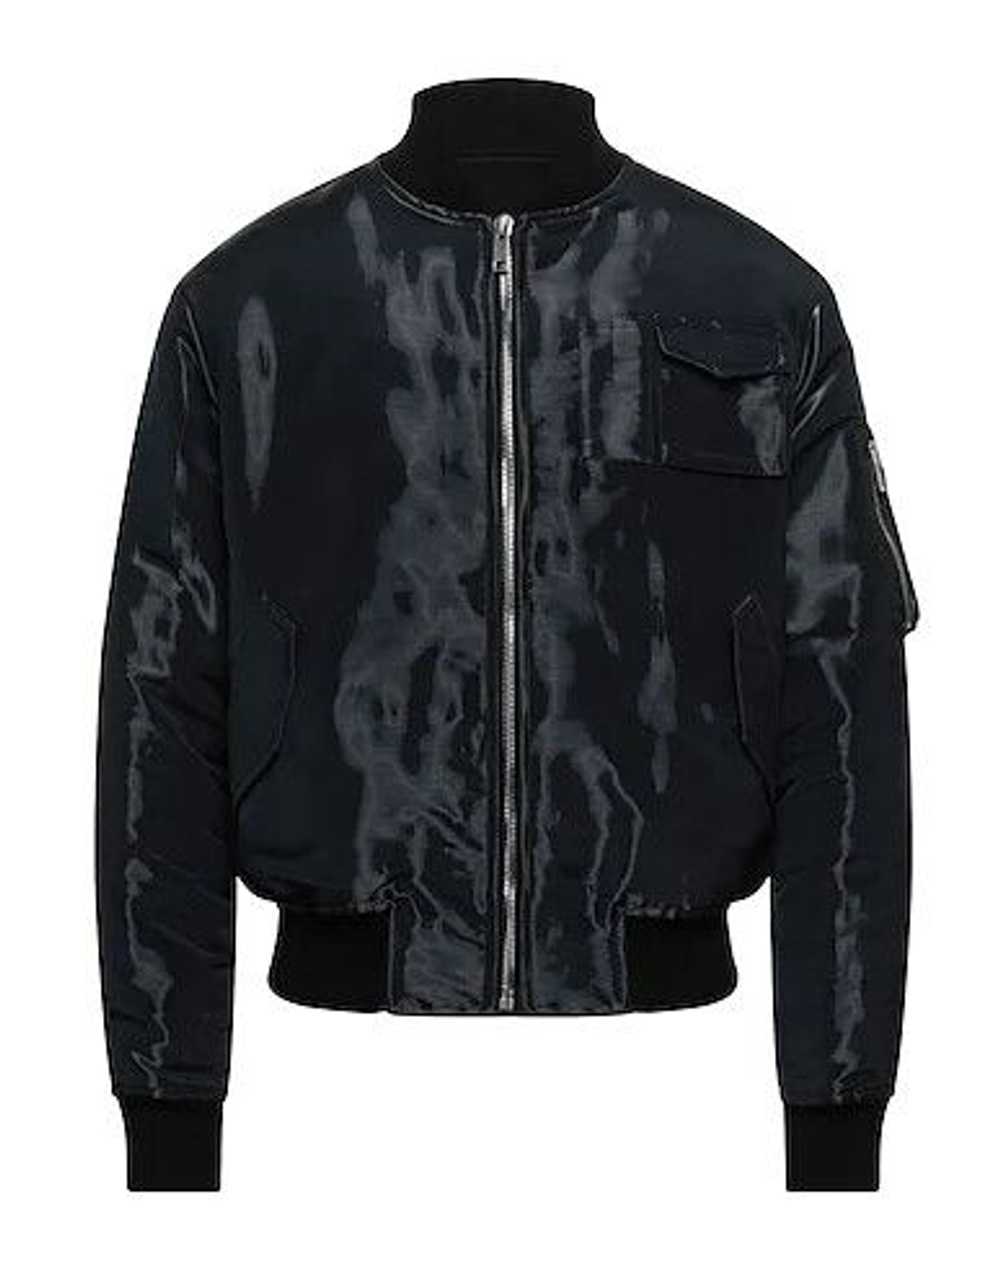 Givenchy Bomber in Black - image 1